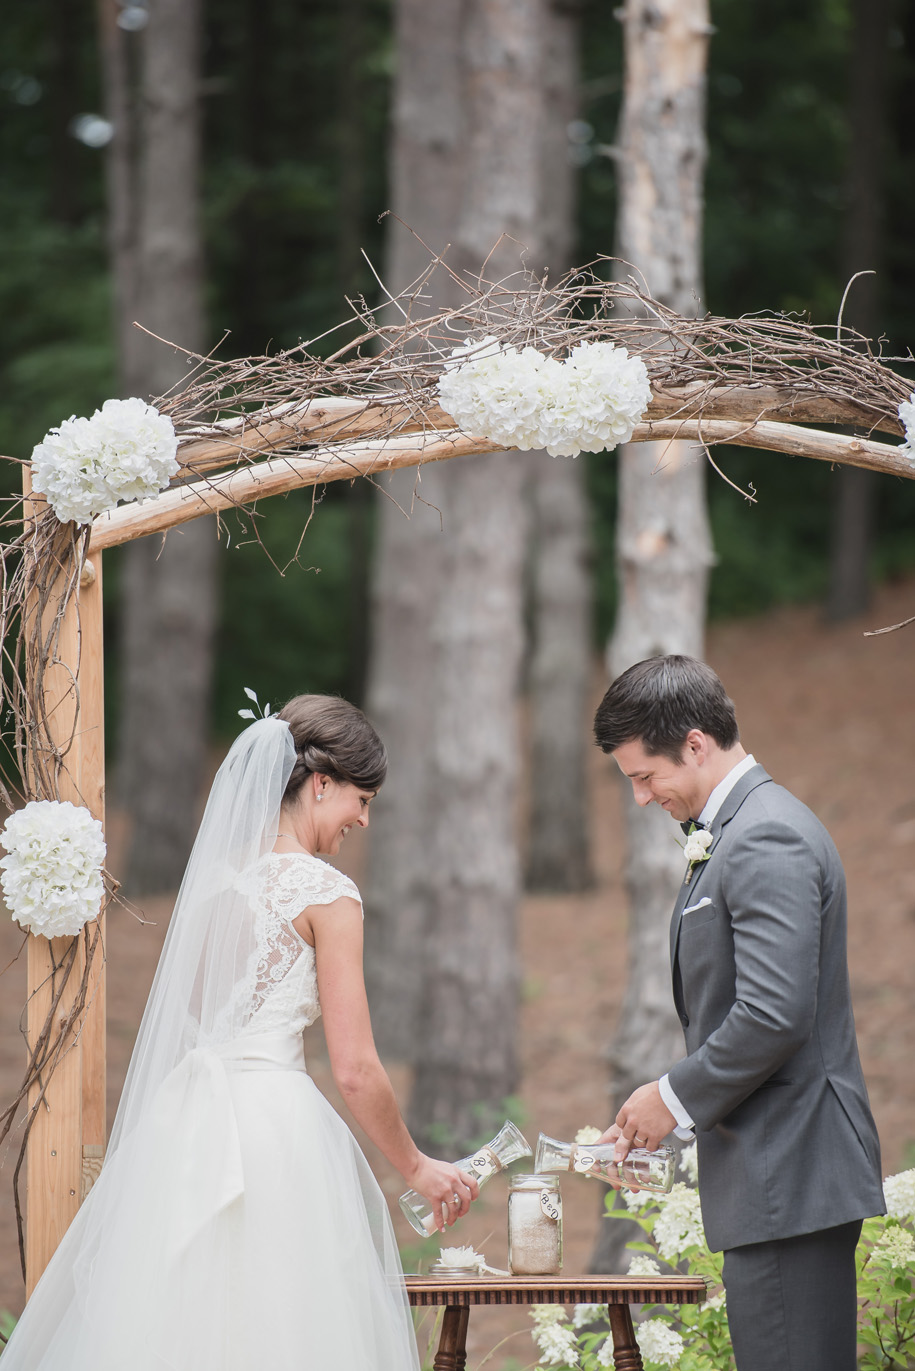 Rustic twig and branch arbor for a rustic elegant outdoor ceremony in the woods l Lace wedding dress and tulle skirt l Tuxedo l Bow tie l Sand ceremony